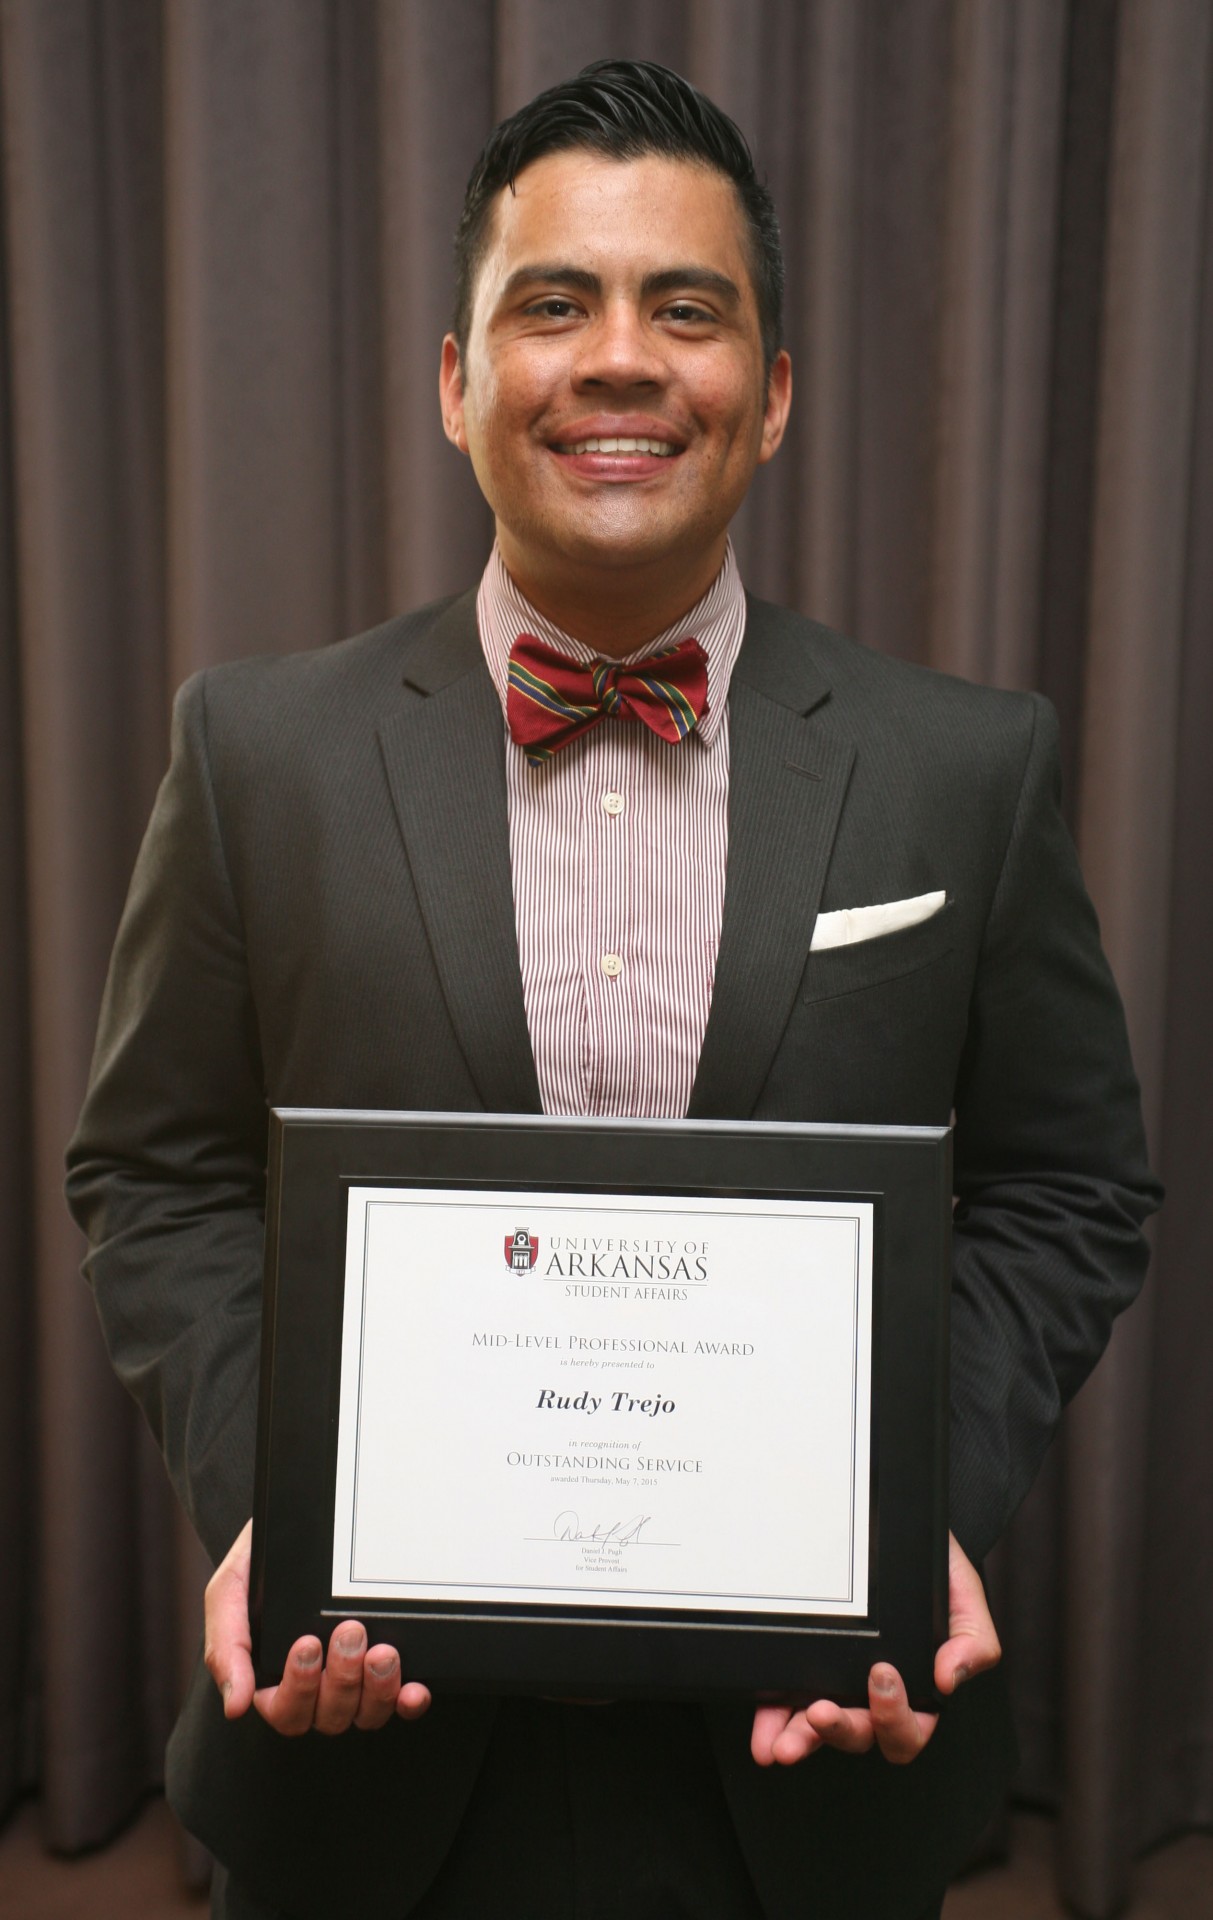 Rudy Trejo received the Outstanding Mid-Level Professional/Rising Star for 2014-2015.